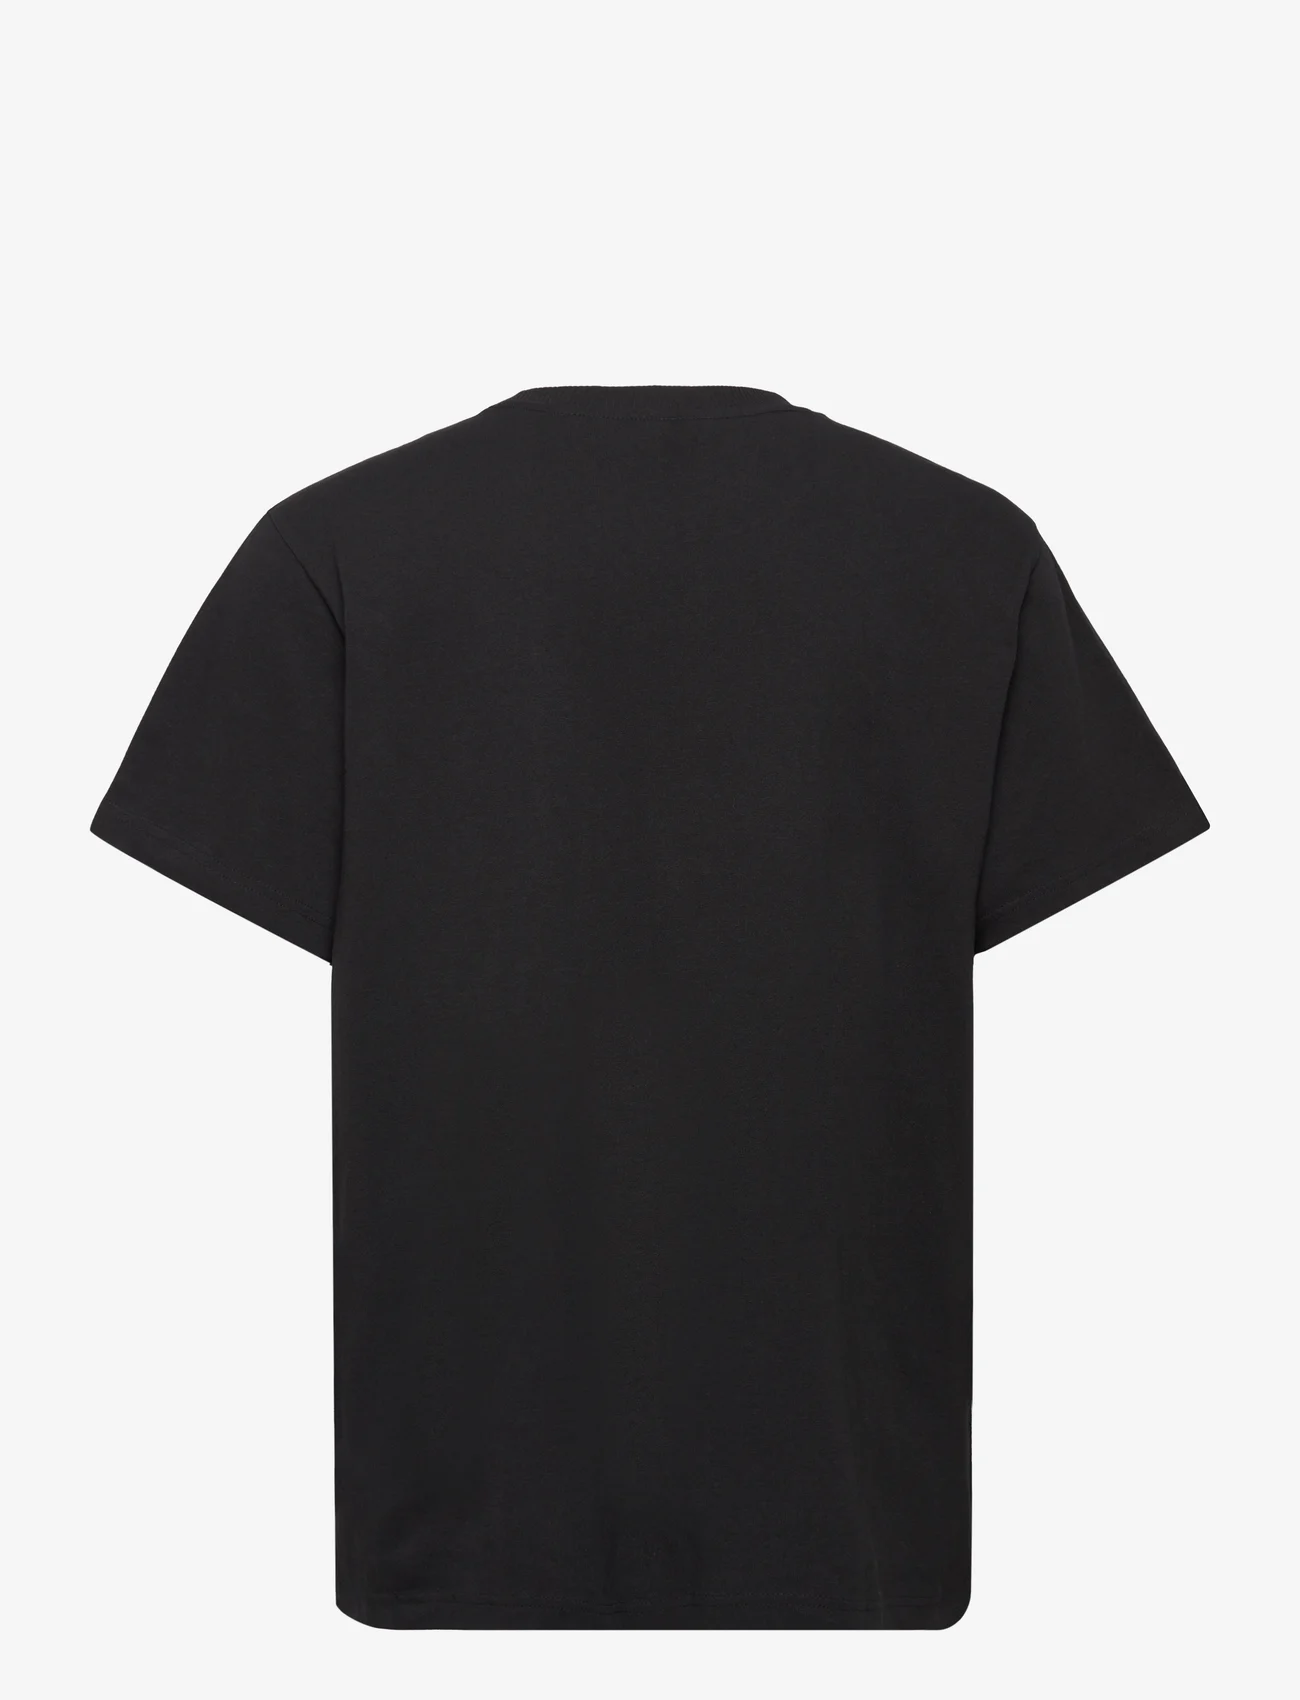 G-Star RAW - Loose r t s\s - lowest prices - dk black - 1